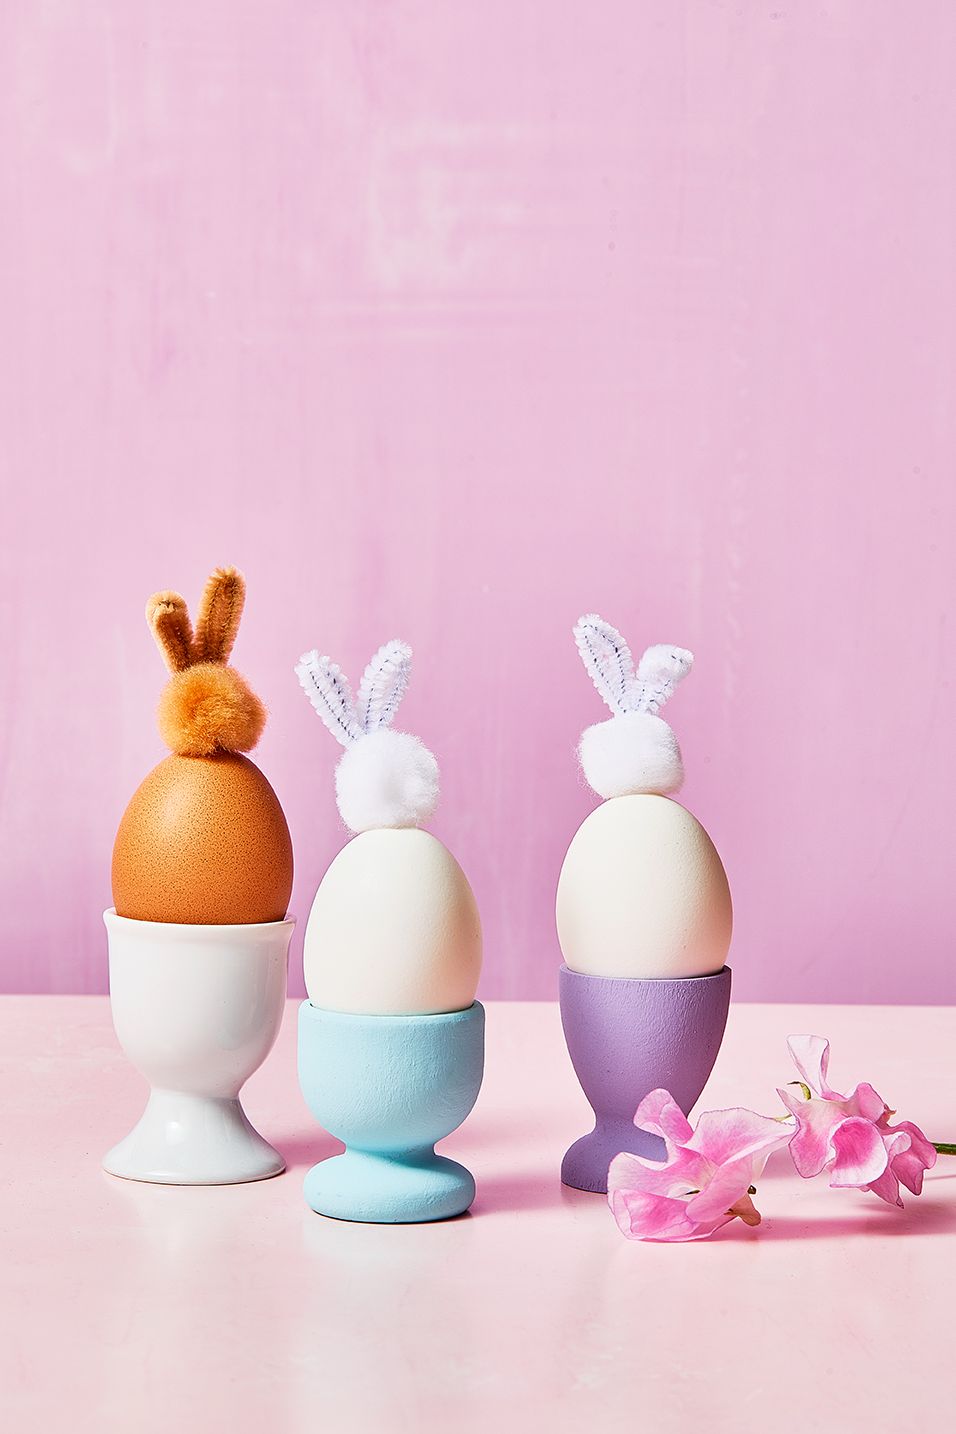 https://hips.hearstapps.com/hmg-prod/images/bunny-easter-eggs-1614351577.jpg?crop=0.889xw:0.889xh;0.0604xw,0.0438xh&resize=980:*